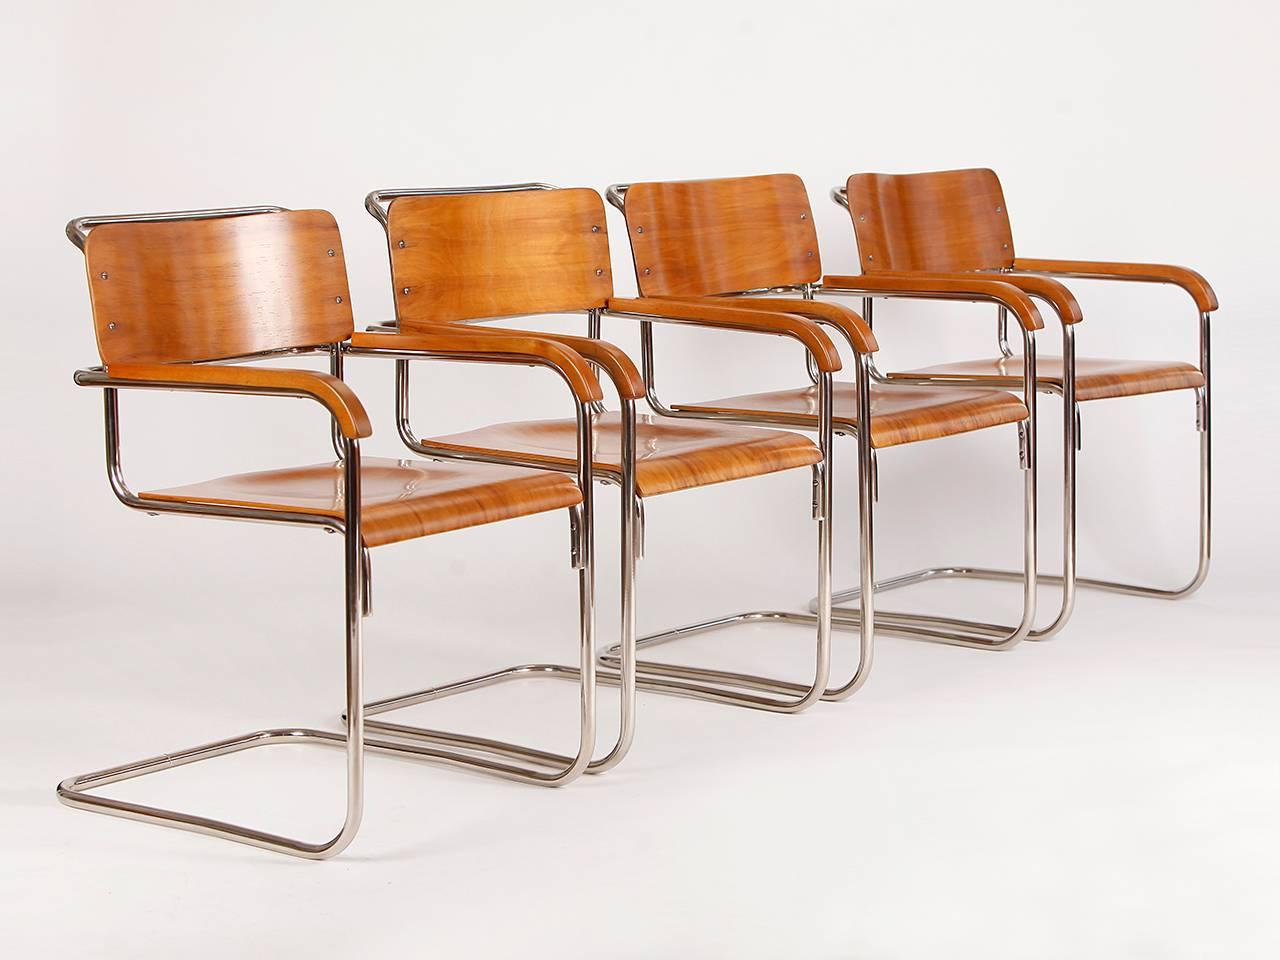 These chairs were produced in the 1930 in former Czechoslovakia by Slezak.
There were two versions, one with fabric and this one with a plywood seat.
Tomas Bata (famous shoefabricant in Zlin) used these chairs in his shops and firms,
that's why